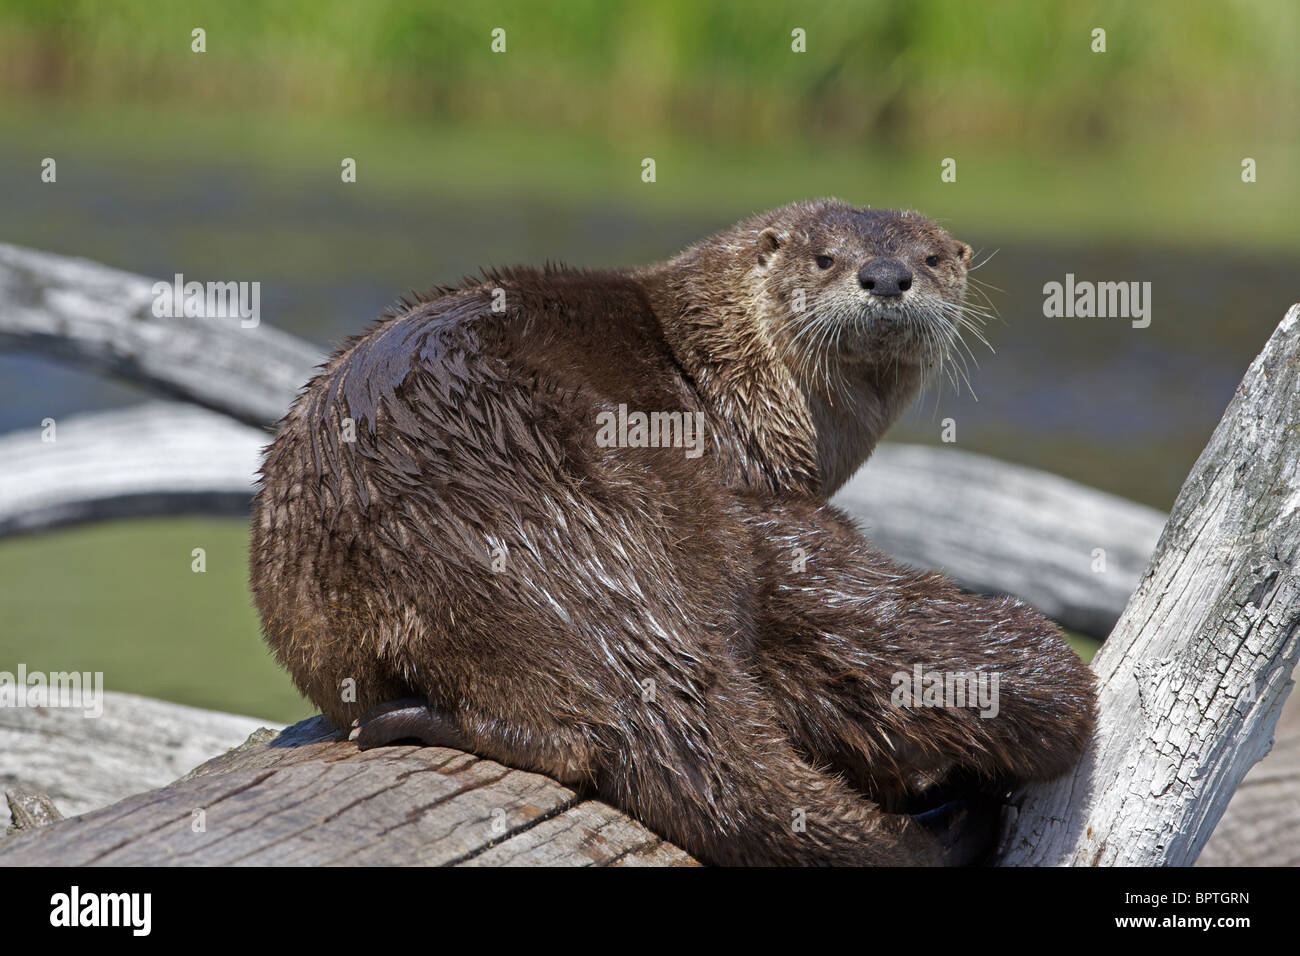 River Otter(s) - (Lutra canadensis) - Wyoming - Eat fish frogs turtles muskrats crayfish - playful intelligent animals Stock Photo